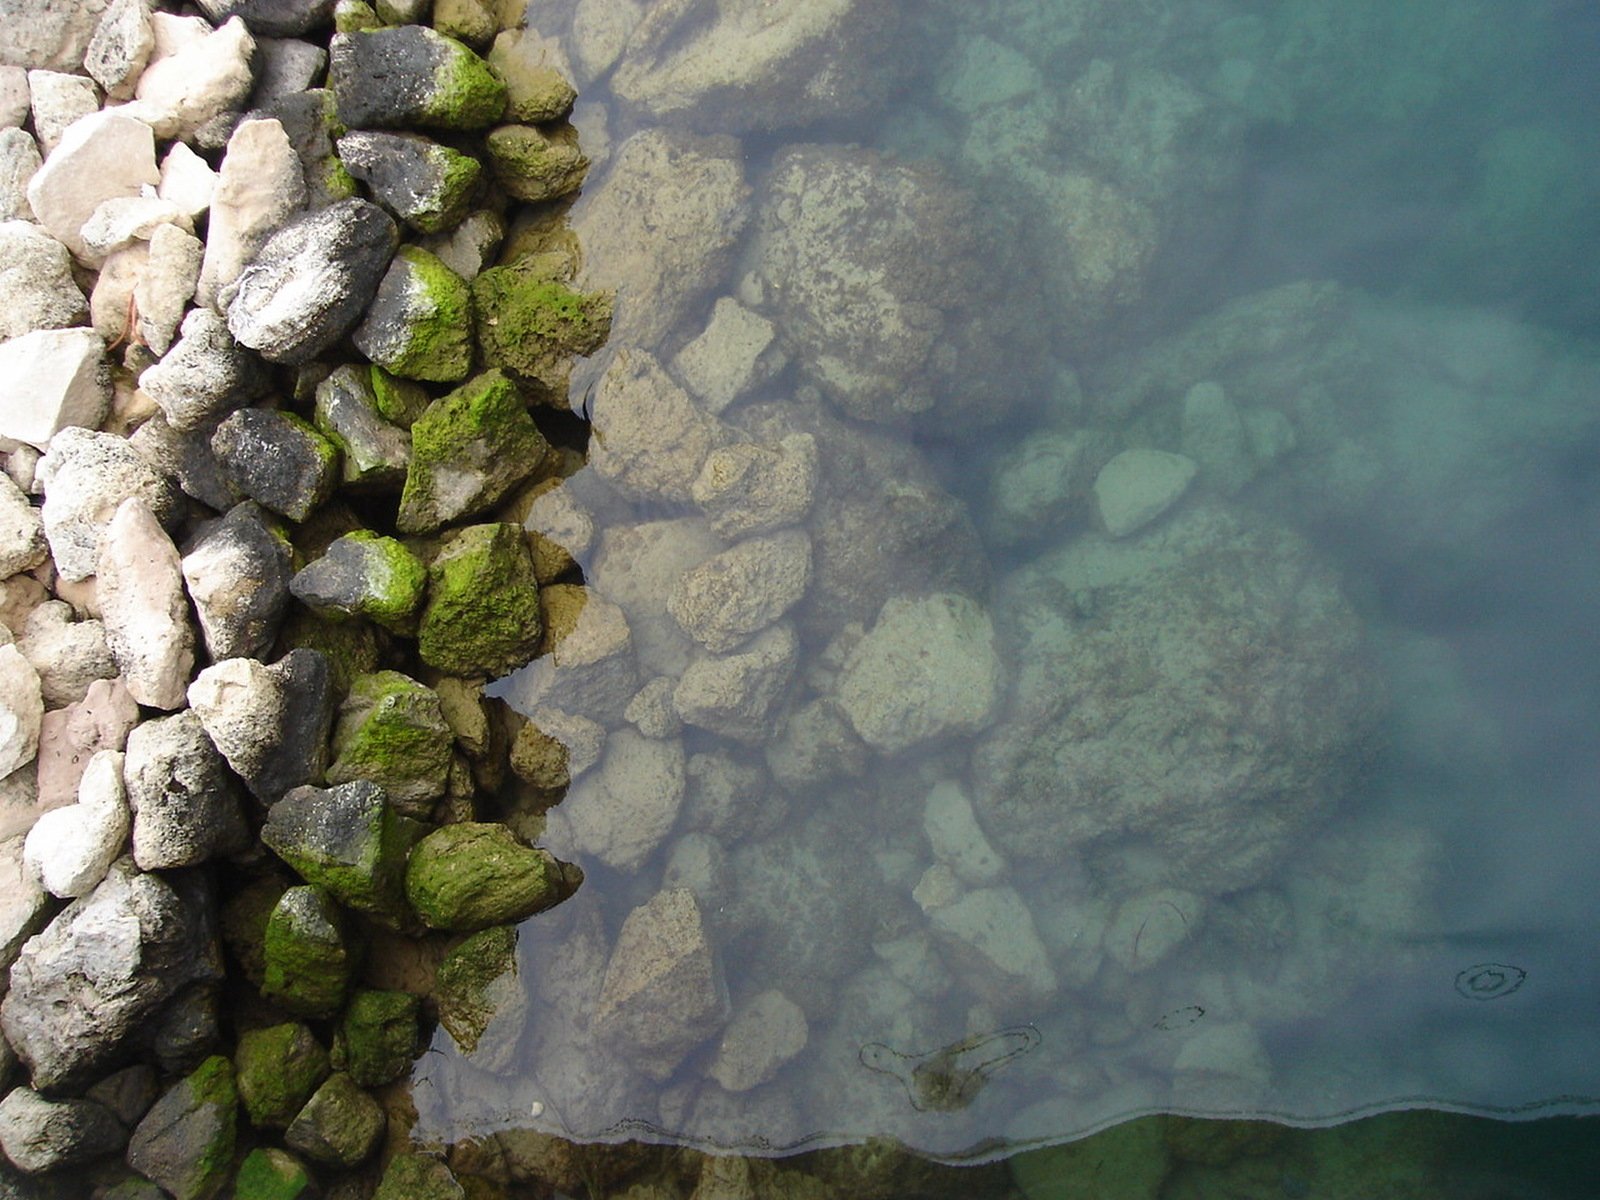 rocks are under water near the shore